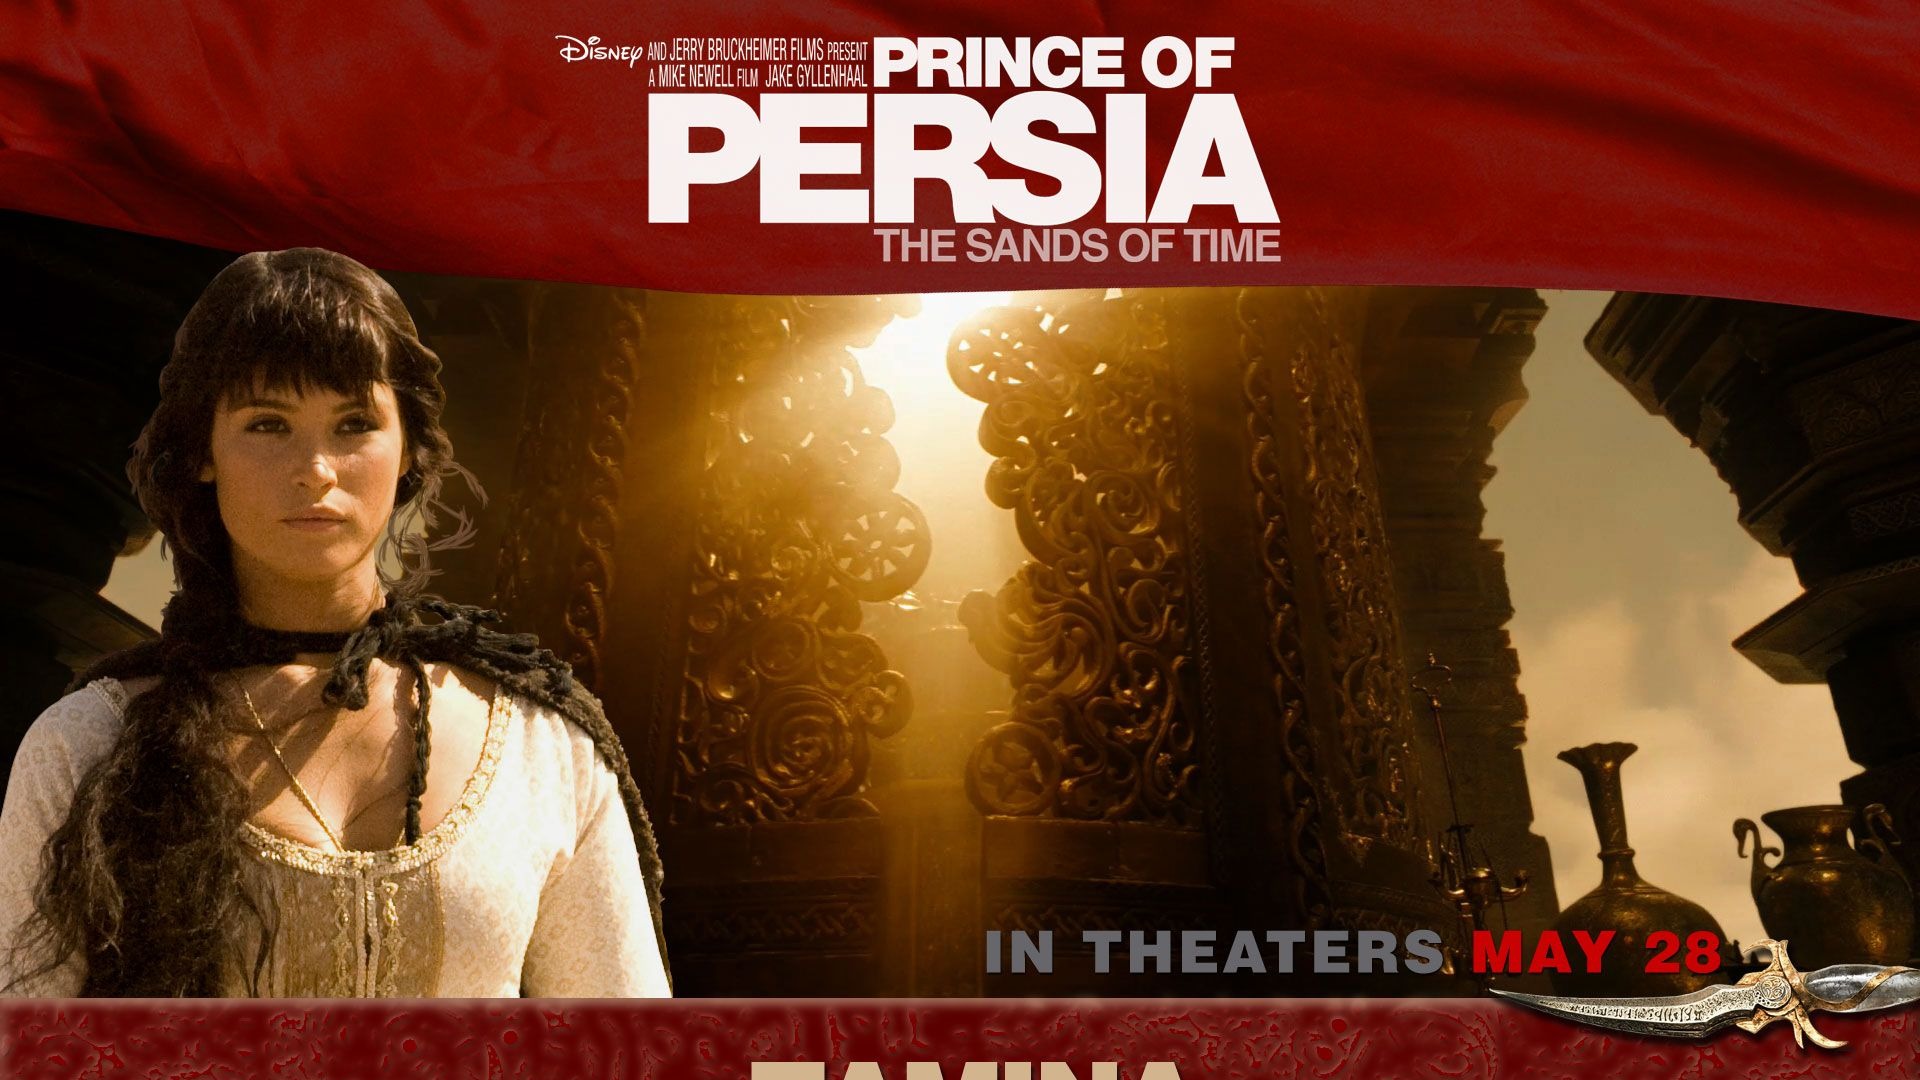 Prince of Persia The Sands of Time 波斯王子：時之刃 #36 - 1920x1080